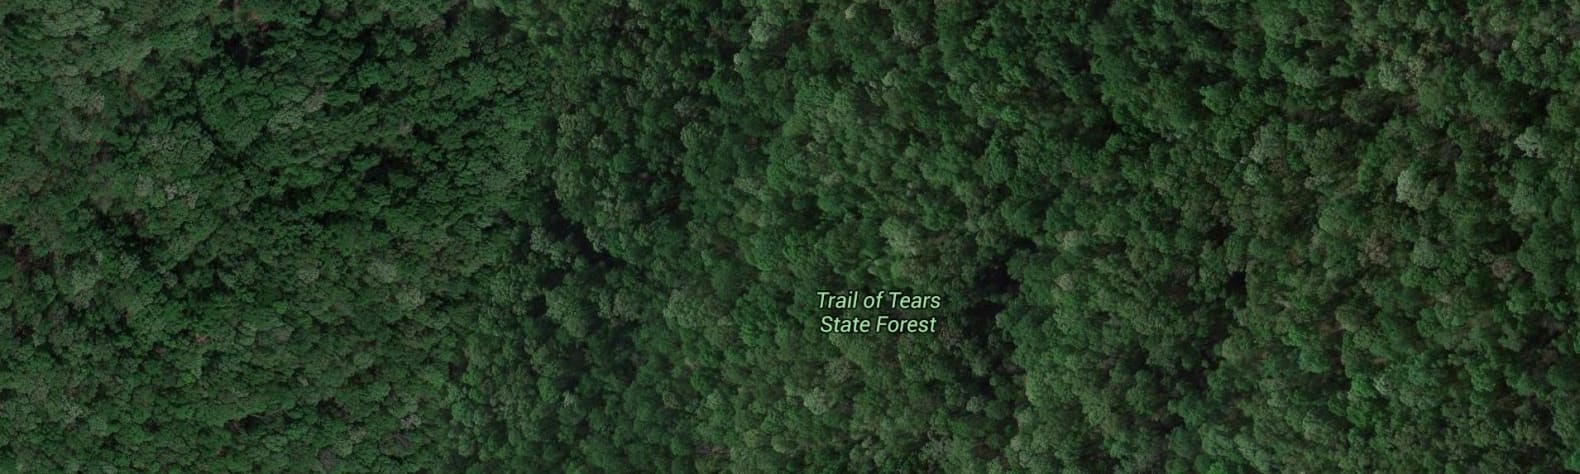 Trail of Tears State Forest